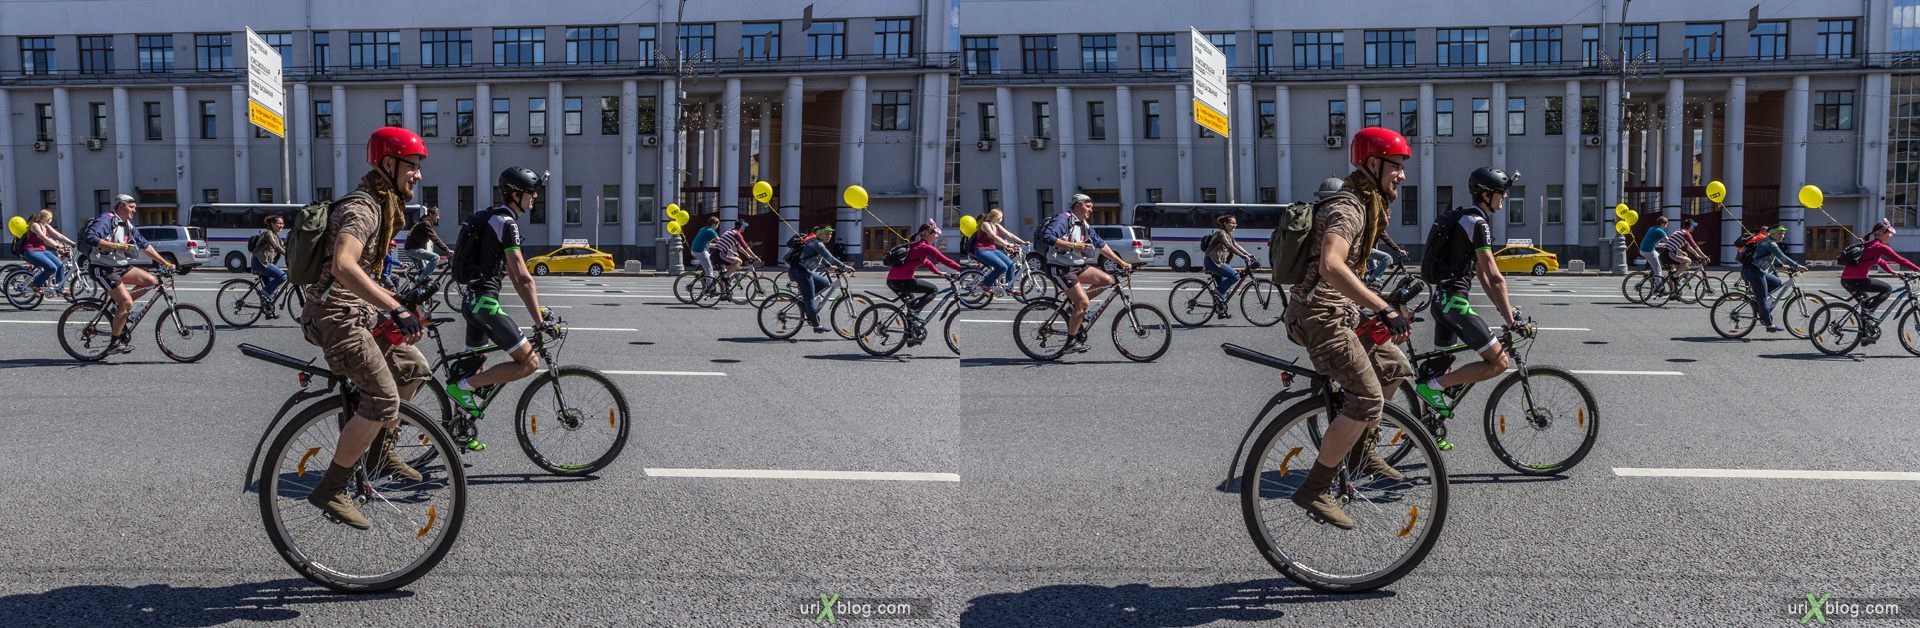 2014, bicycle, parade, Moscow, Russia, Garden Ring avenue, summer, june, 3D, stereo pair, cross-eyed, crossview, cross view stereo pair, stereoscopic